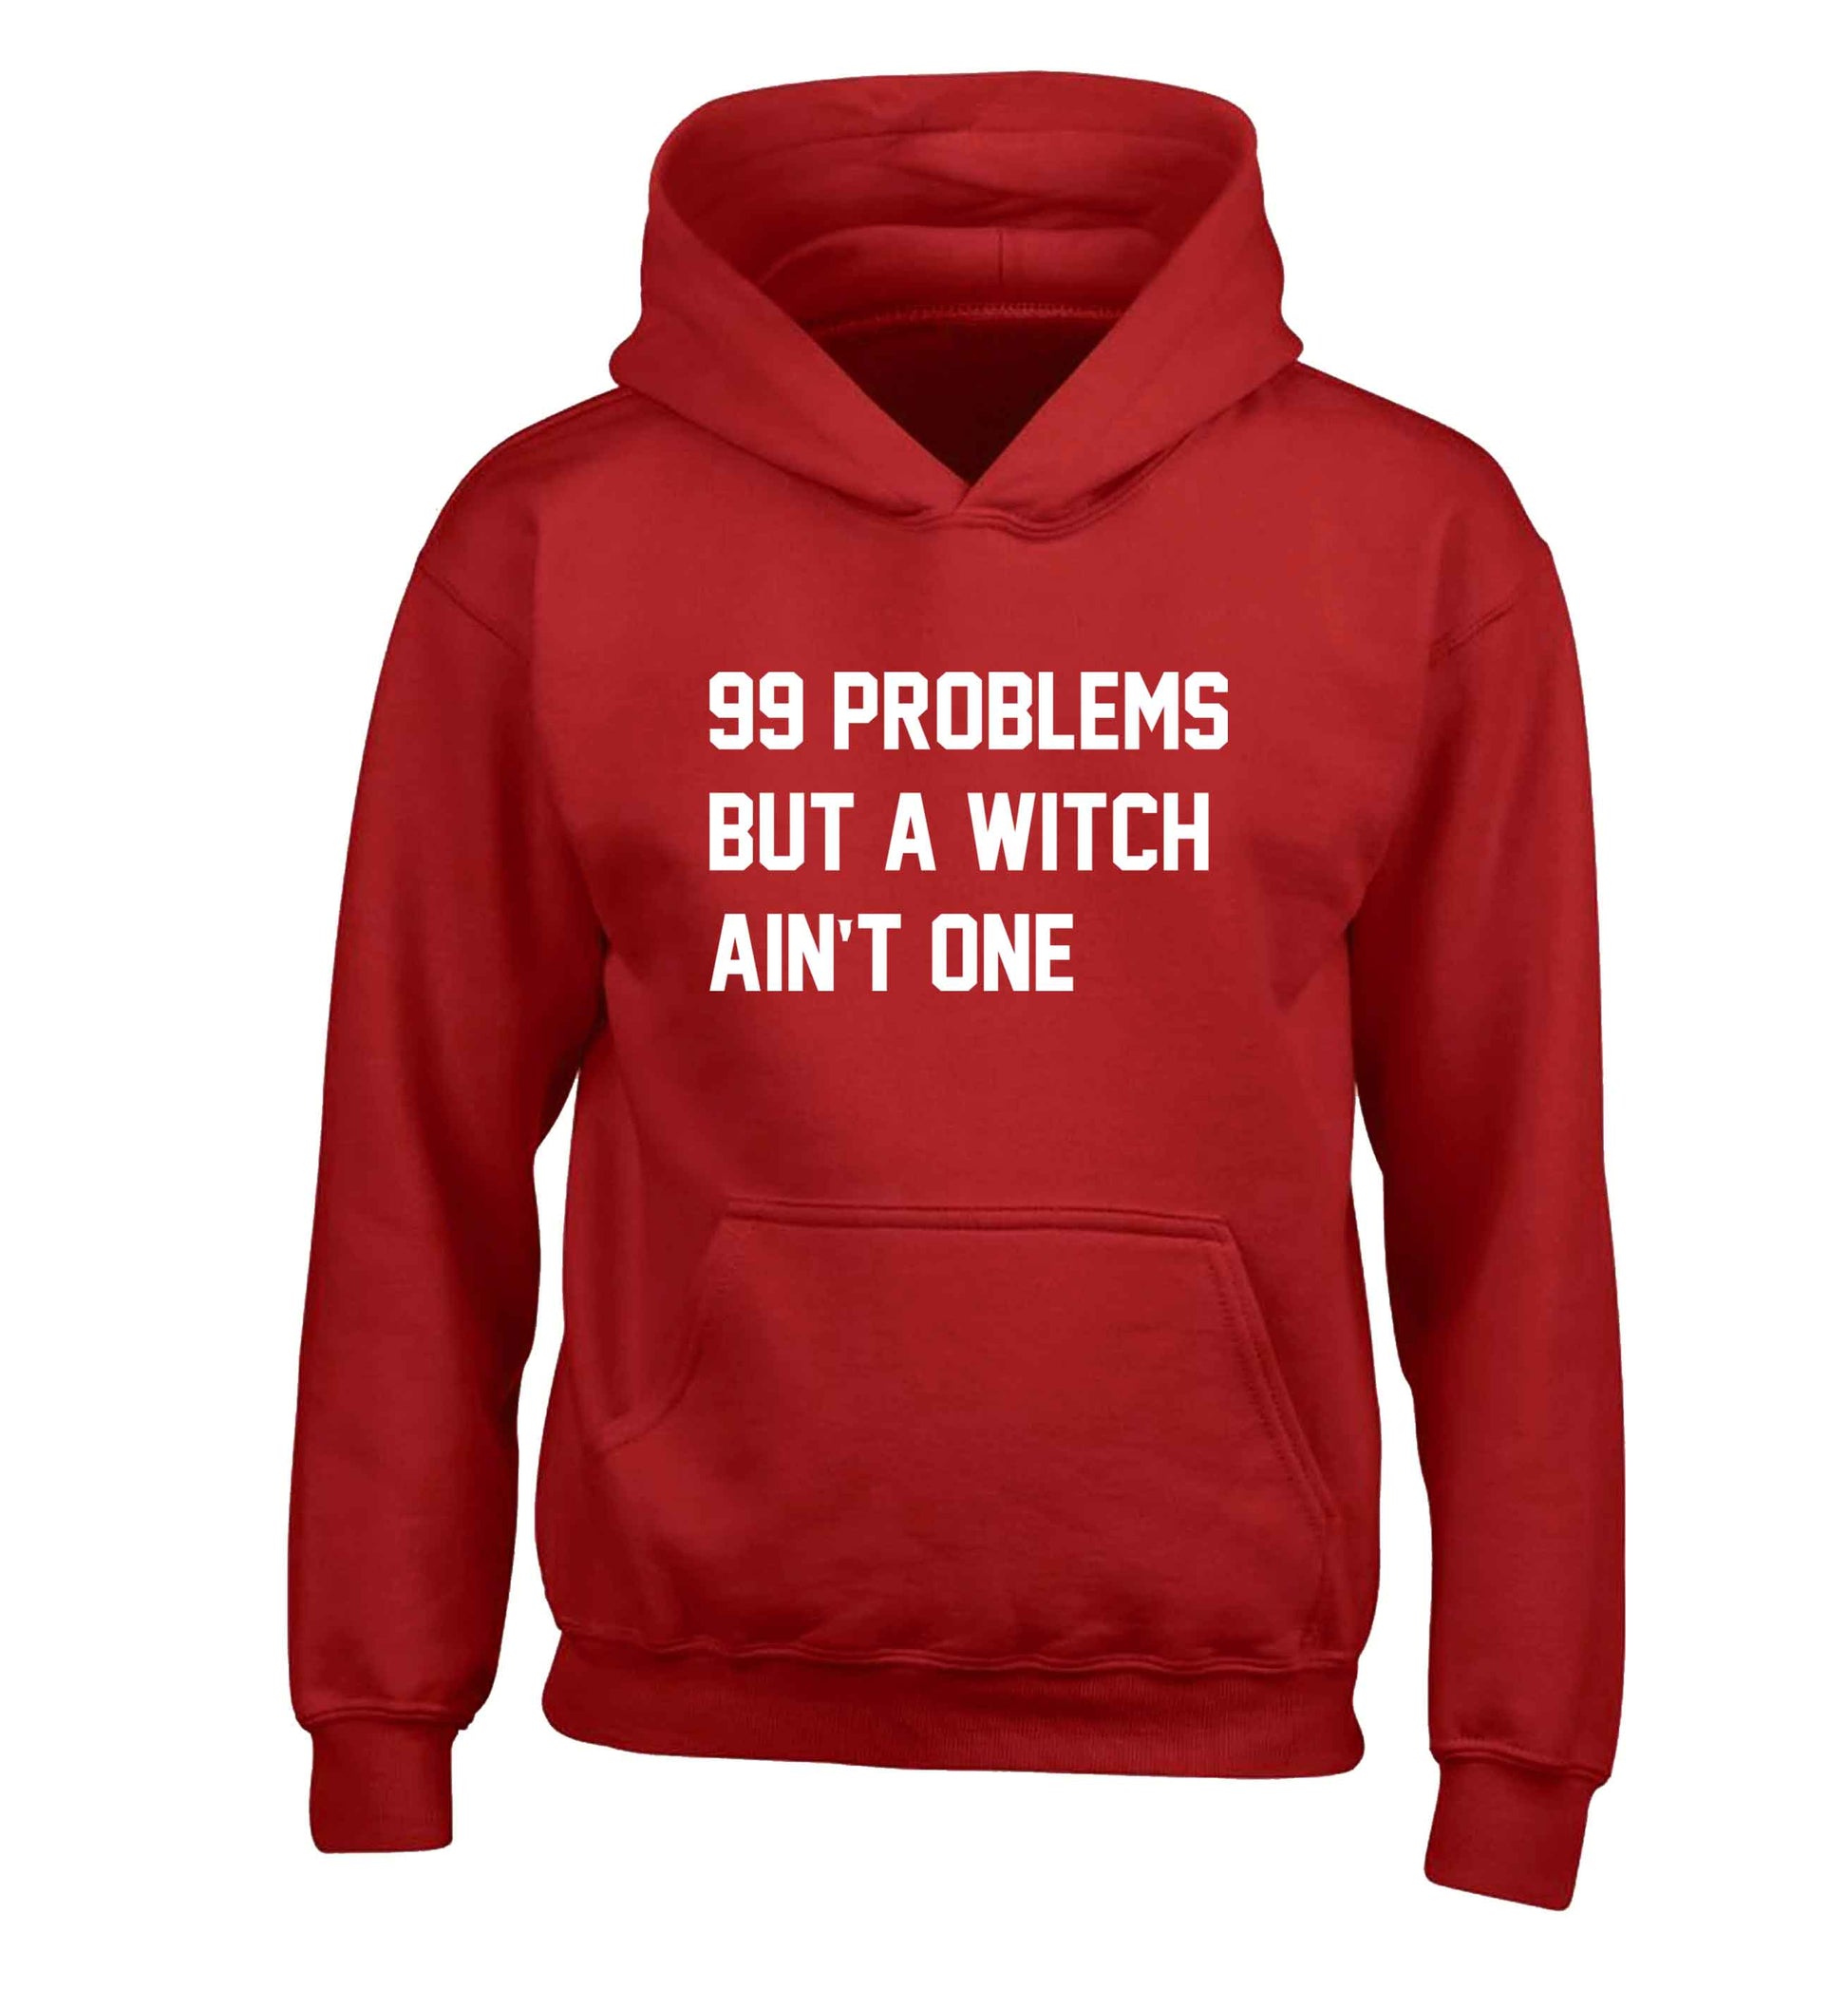 99 Problems but a witch aint one children's red hoodie 12-13 Years